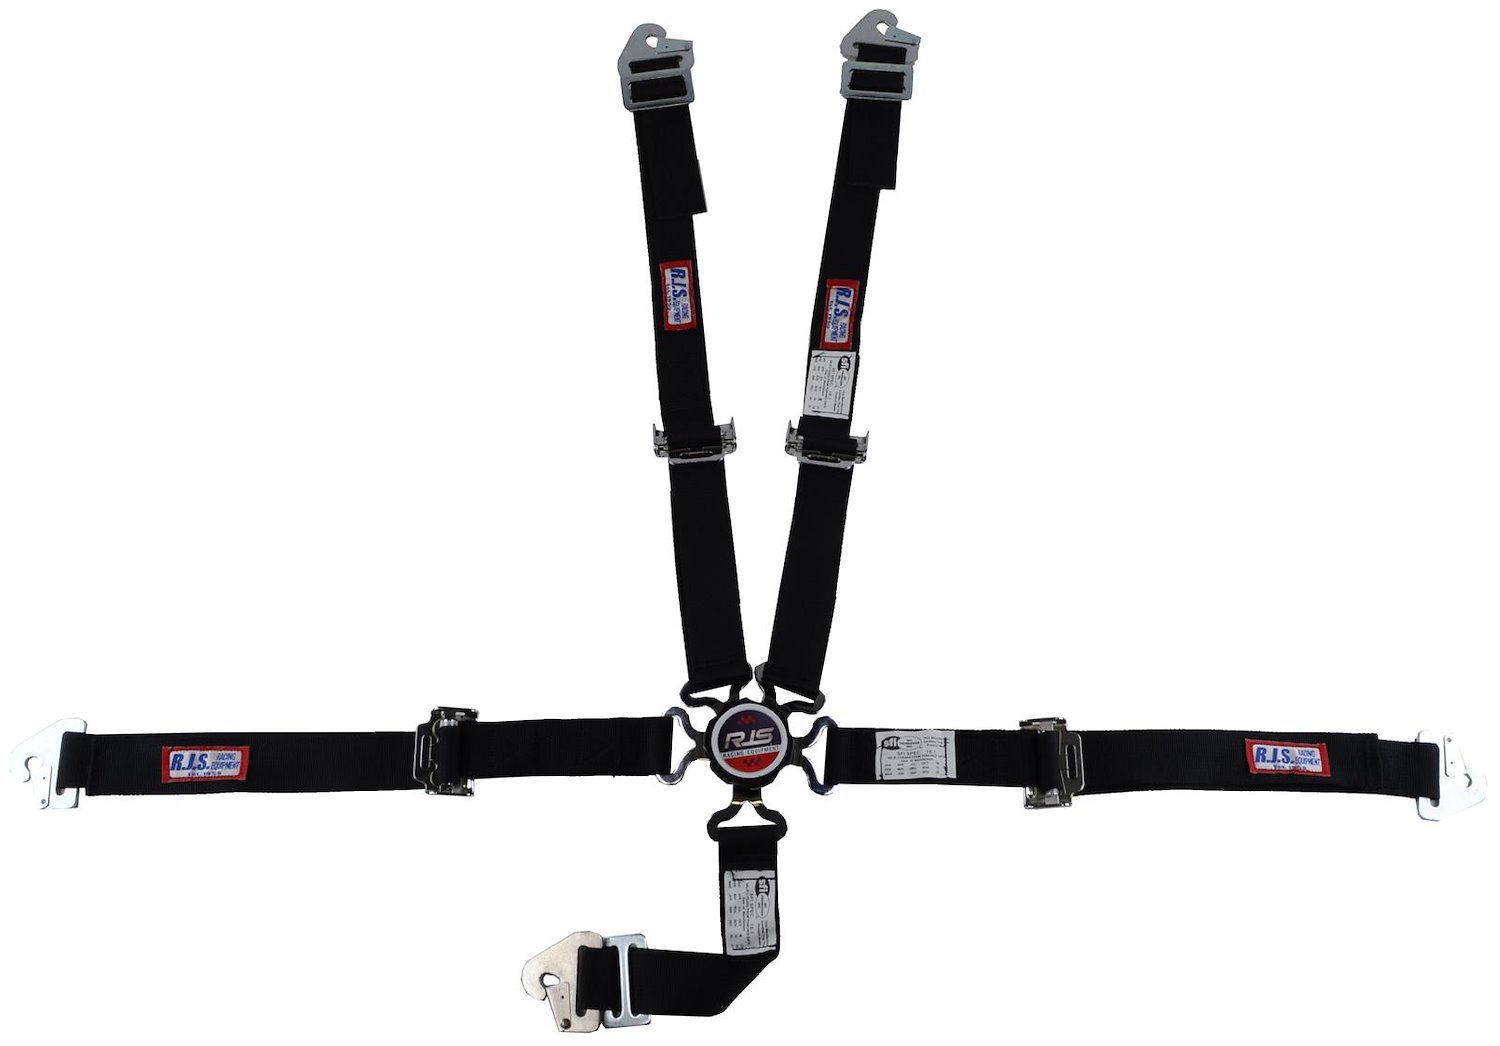 SFI 16.1 CAM-LOCK HARNESS 2 PULL UP Lap Belt 2 Shoulder Harness Individual FLOOR Mount 2 DOUBLESub ALL WRAP ENDS GRAY